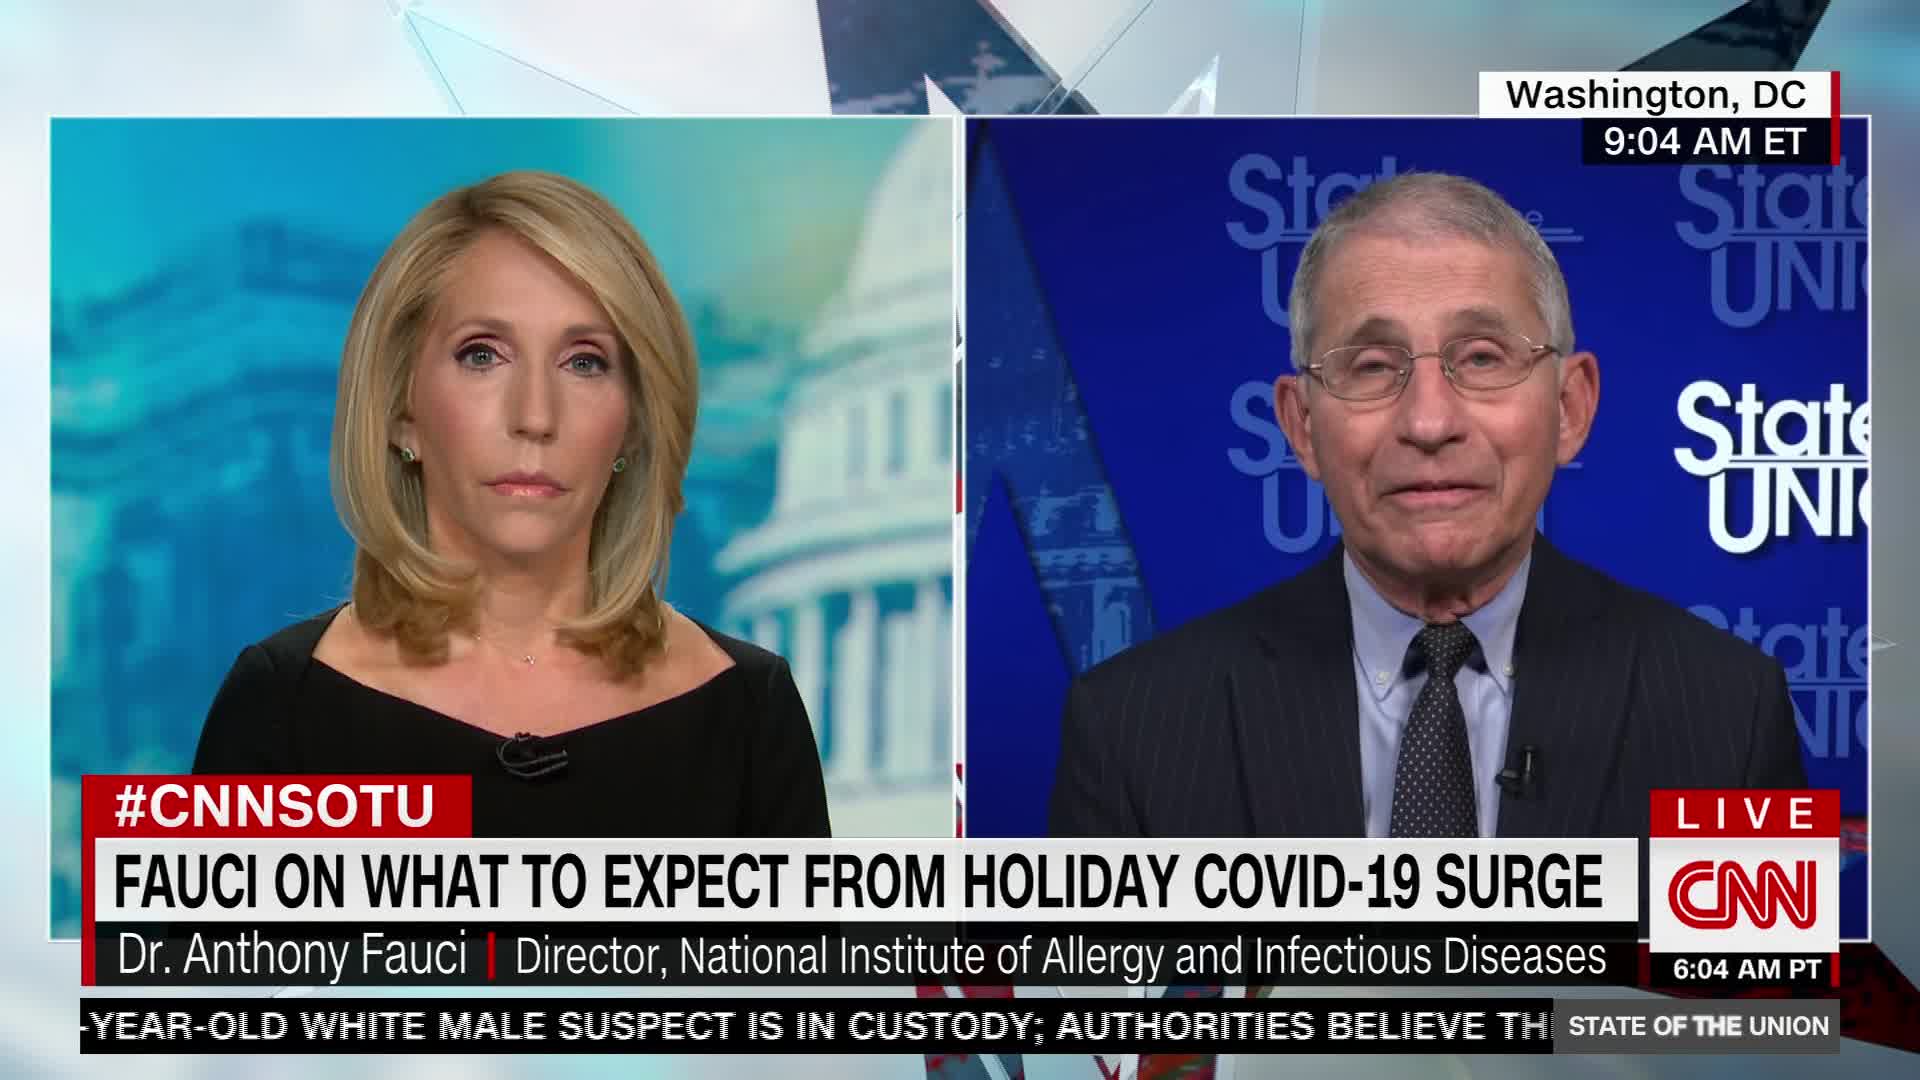 Fassi says he believes the worst case scenario following the holiday season has not yet come